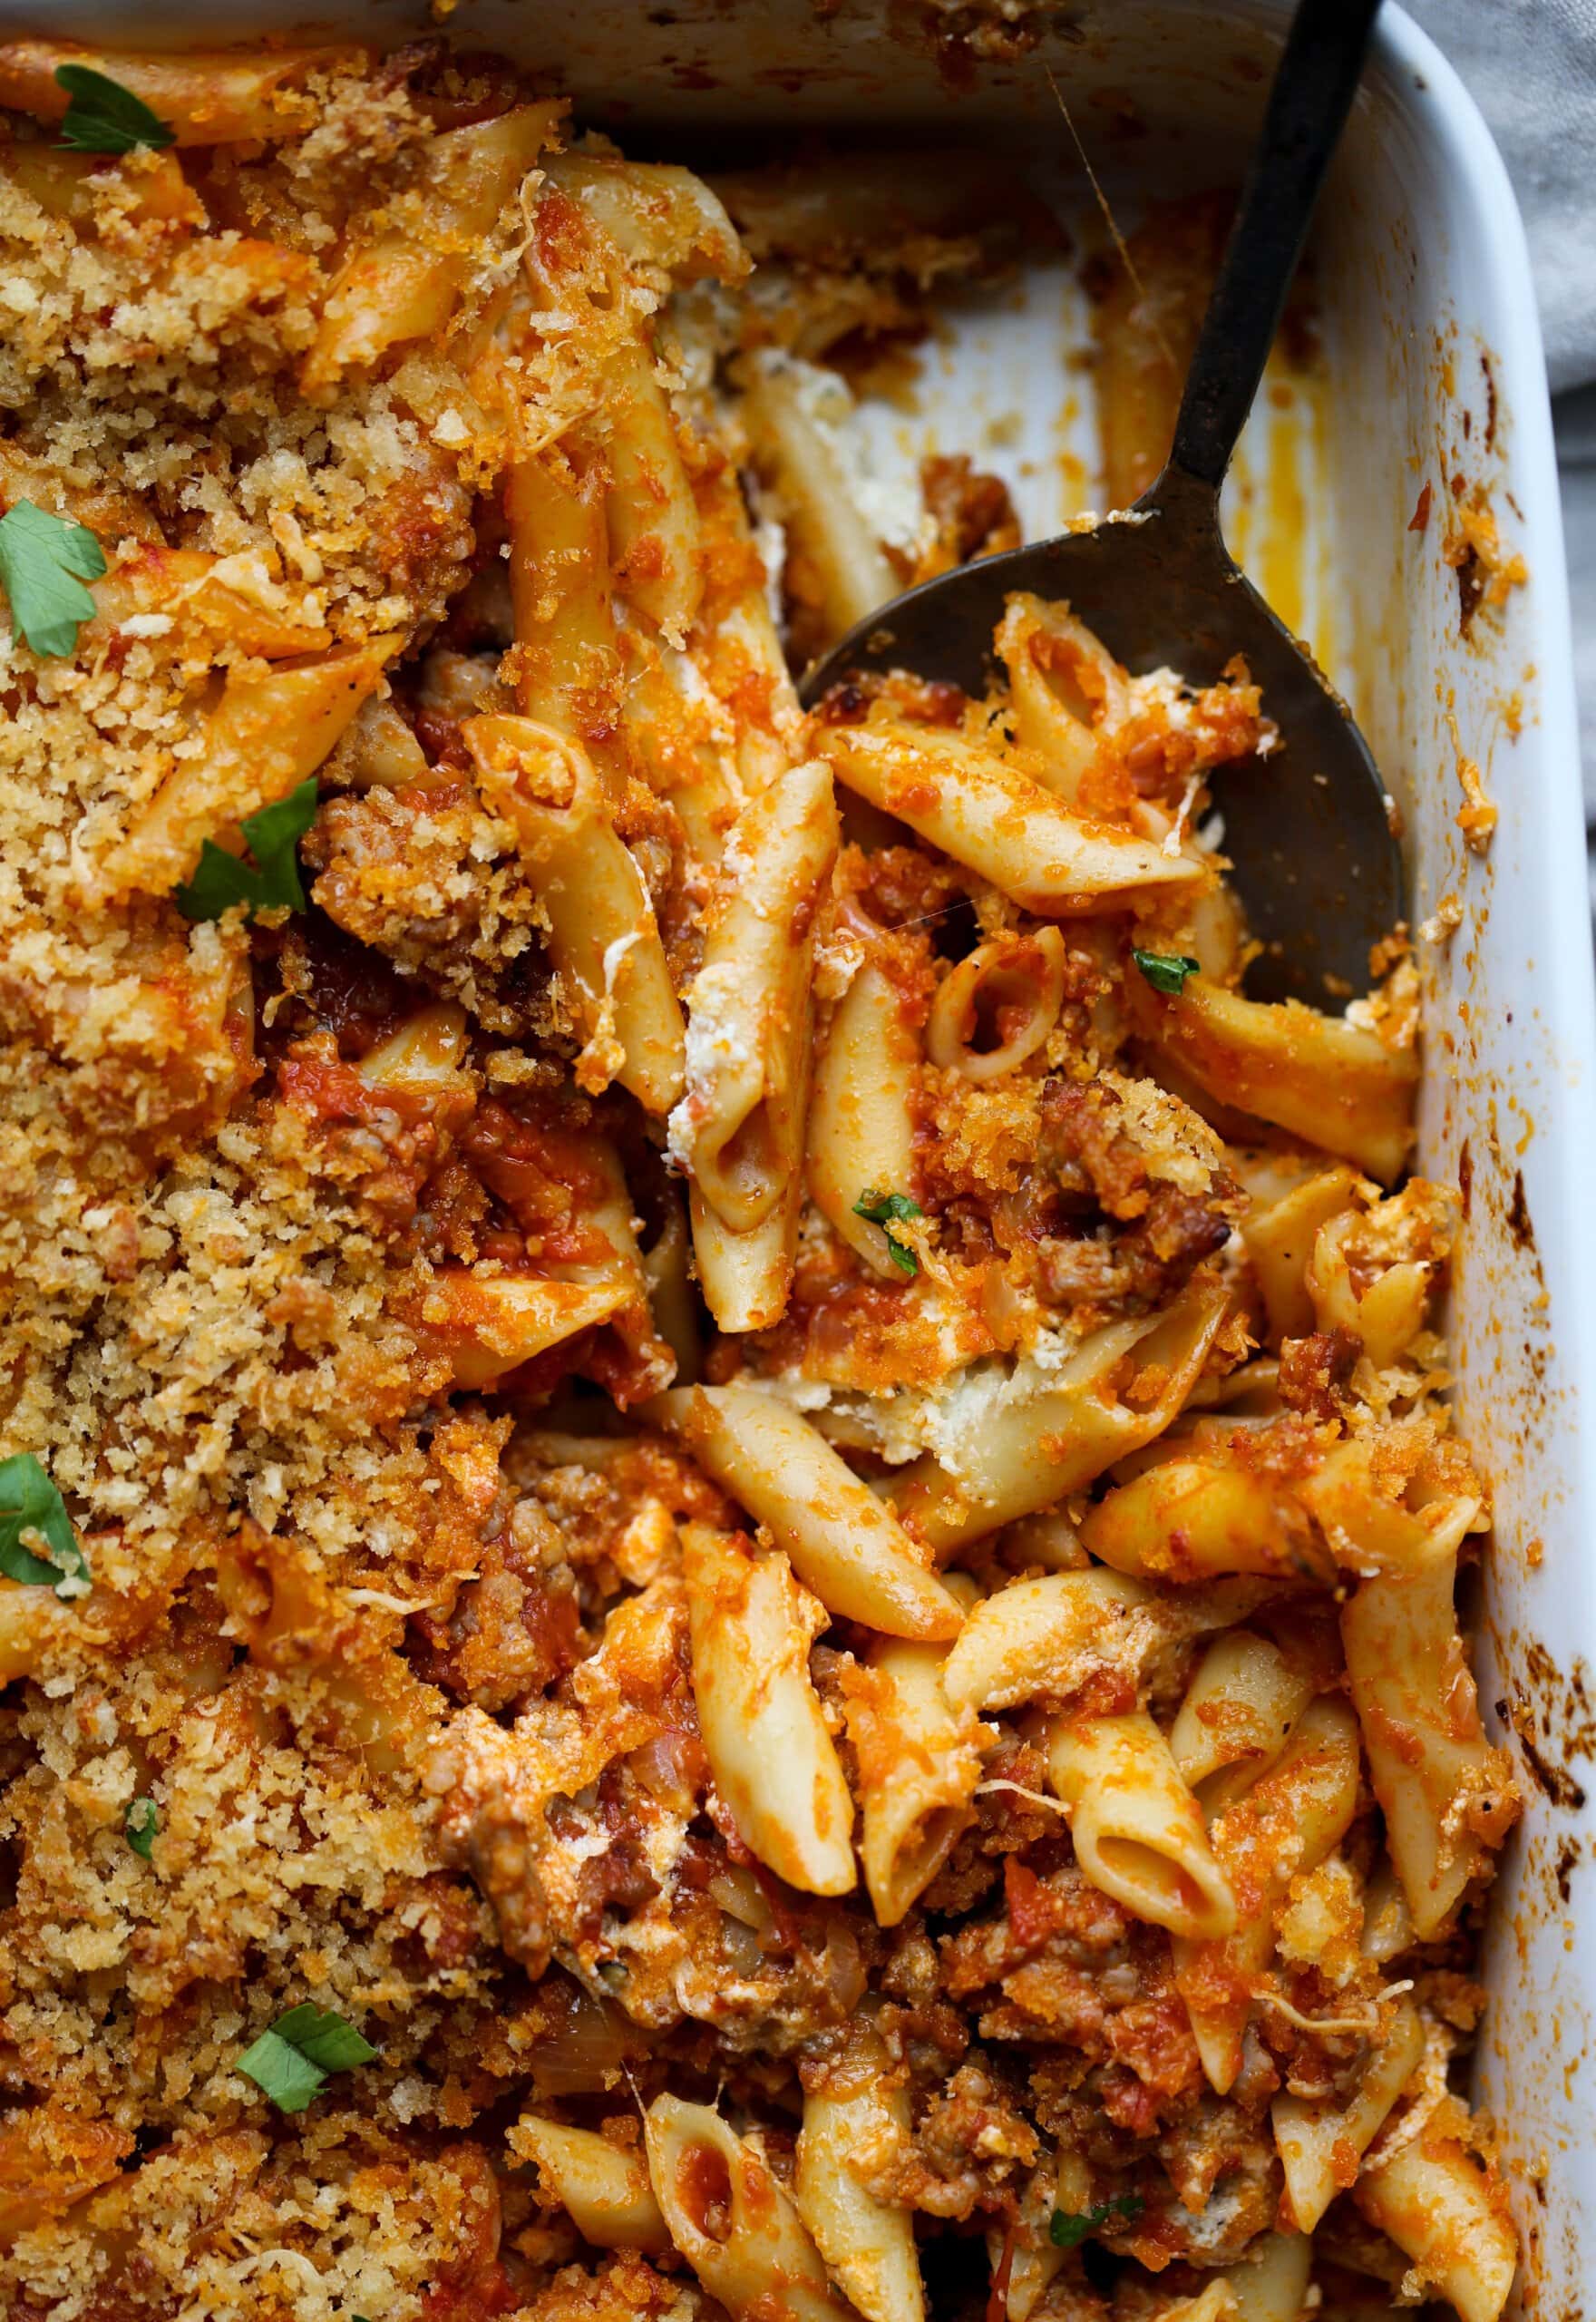 Baked mostaccioli pasta is scooped from a casserole dish.